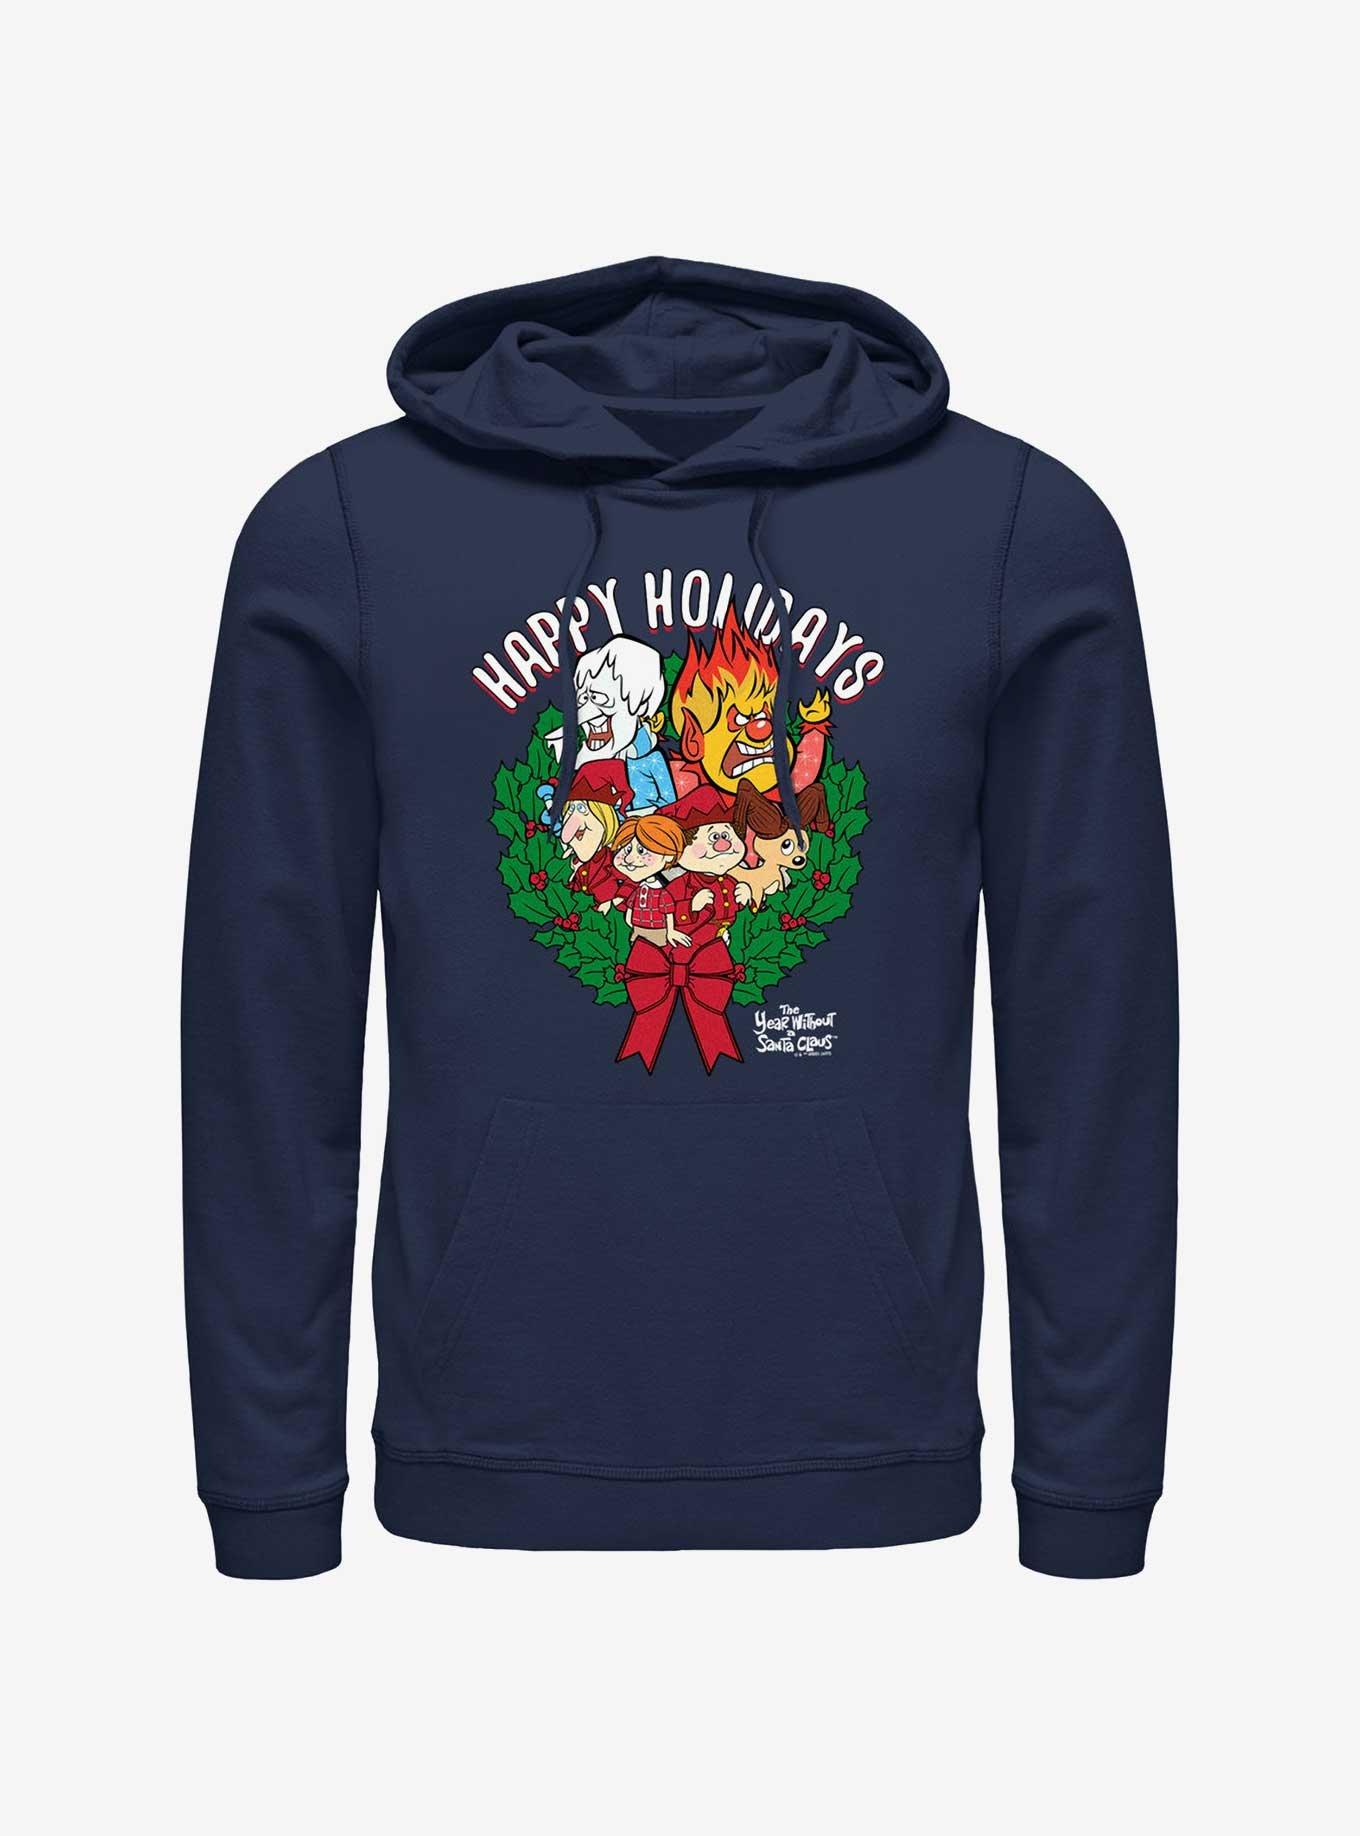 The Year Without a Santa Claus Happy Holidays Wreath Hoodie